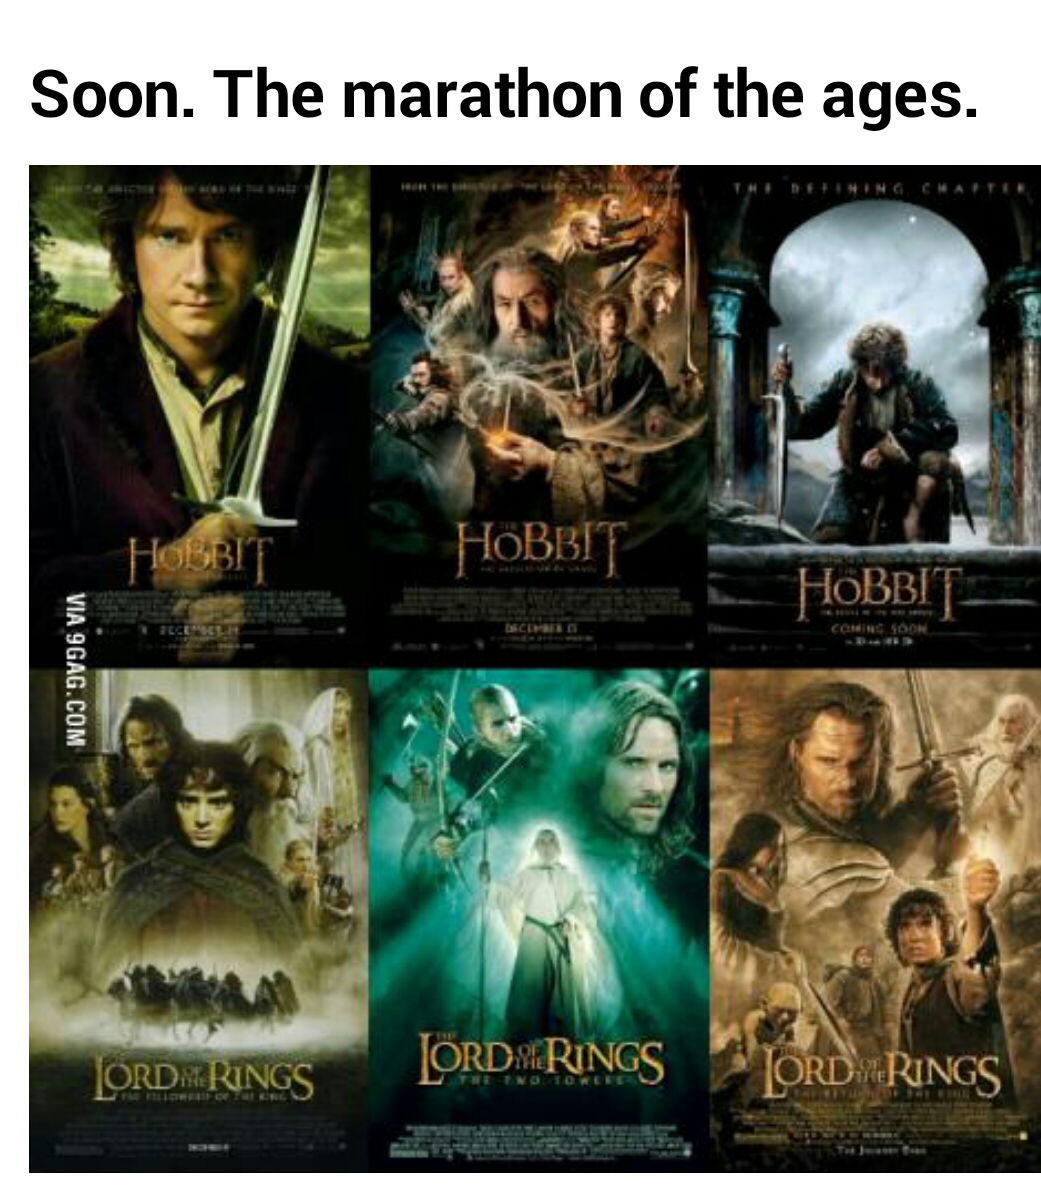 dragonlordoferebor:
“ elvenkingthrandy:
“ thecumbercookieaboveallothers:
“ mindtriggers:
“ THIS WILL BE SUCH A LONG MARATHON AND I AM SO READY
”
That’s prob about 12 hours
”
extended lotr alone is 11 hours and 22 minutes.
”
to watch the extended...